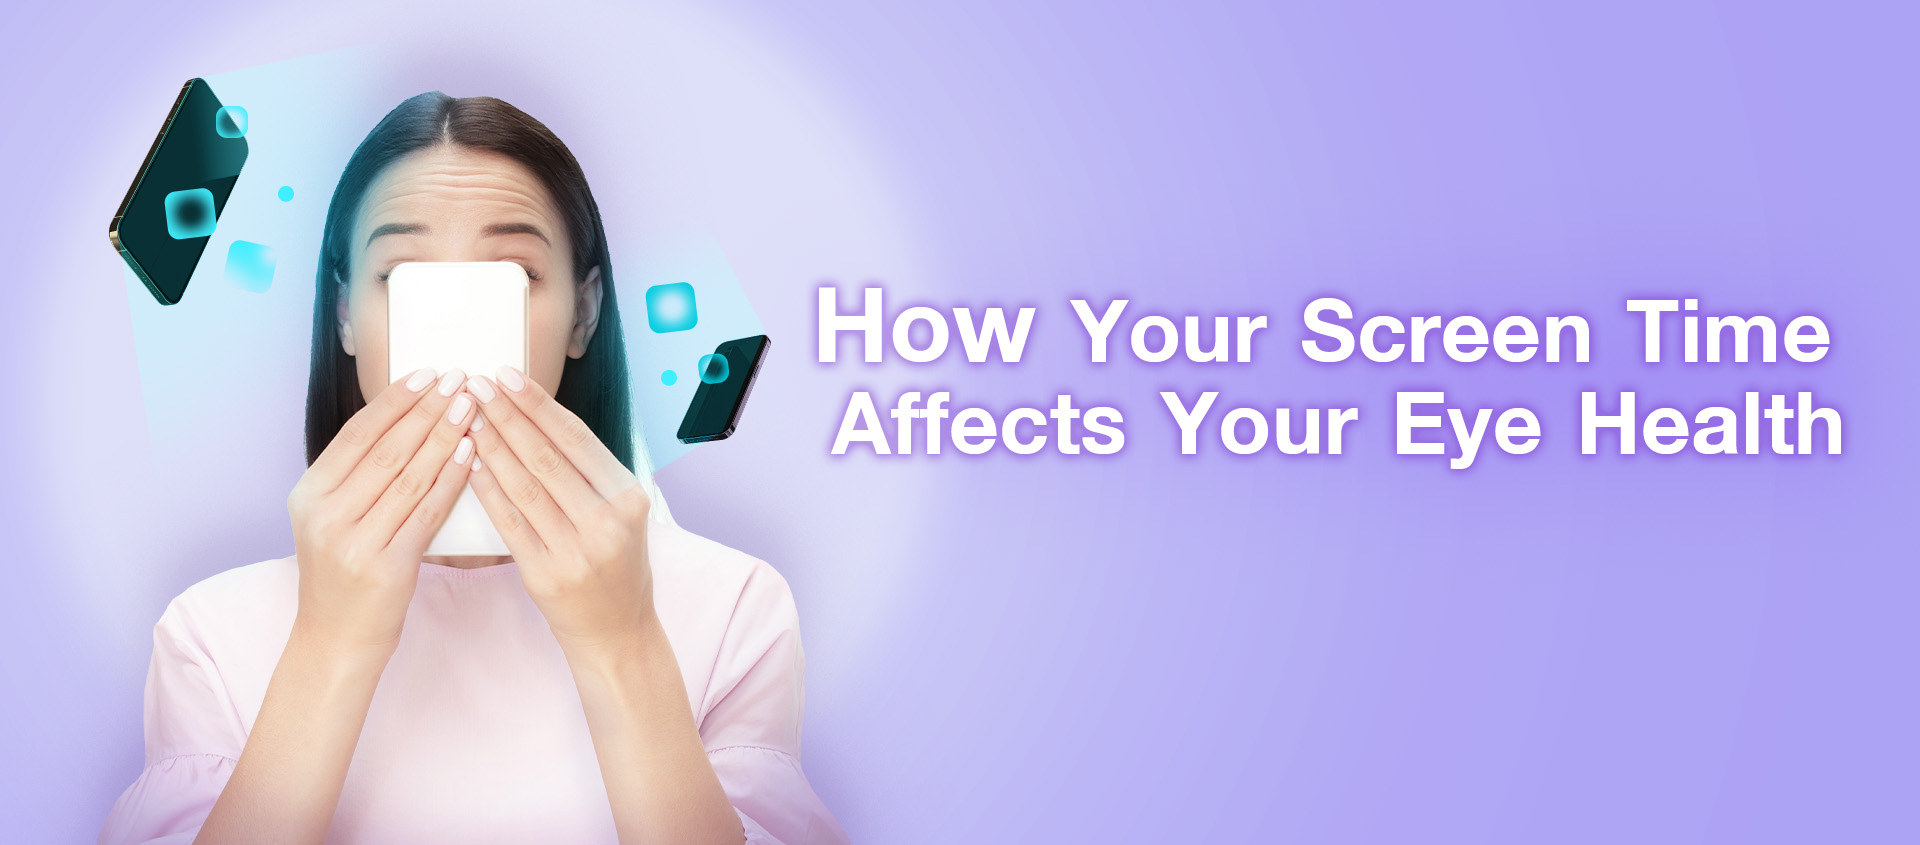 How Your Screen Tume Affects Your Eye Health